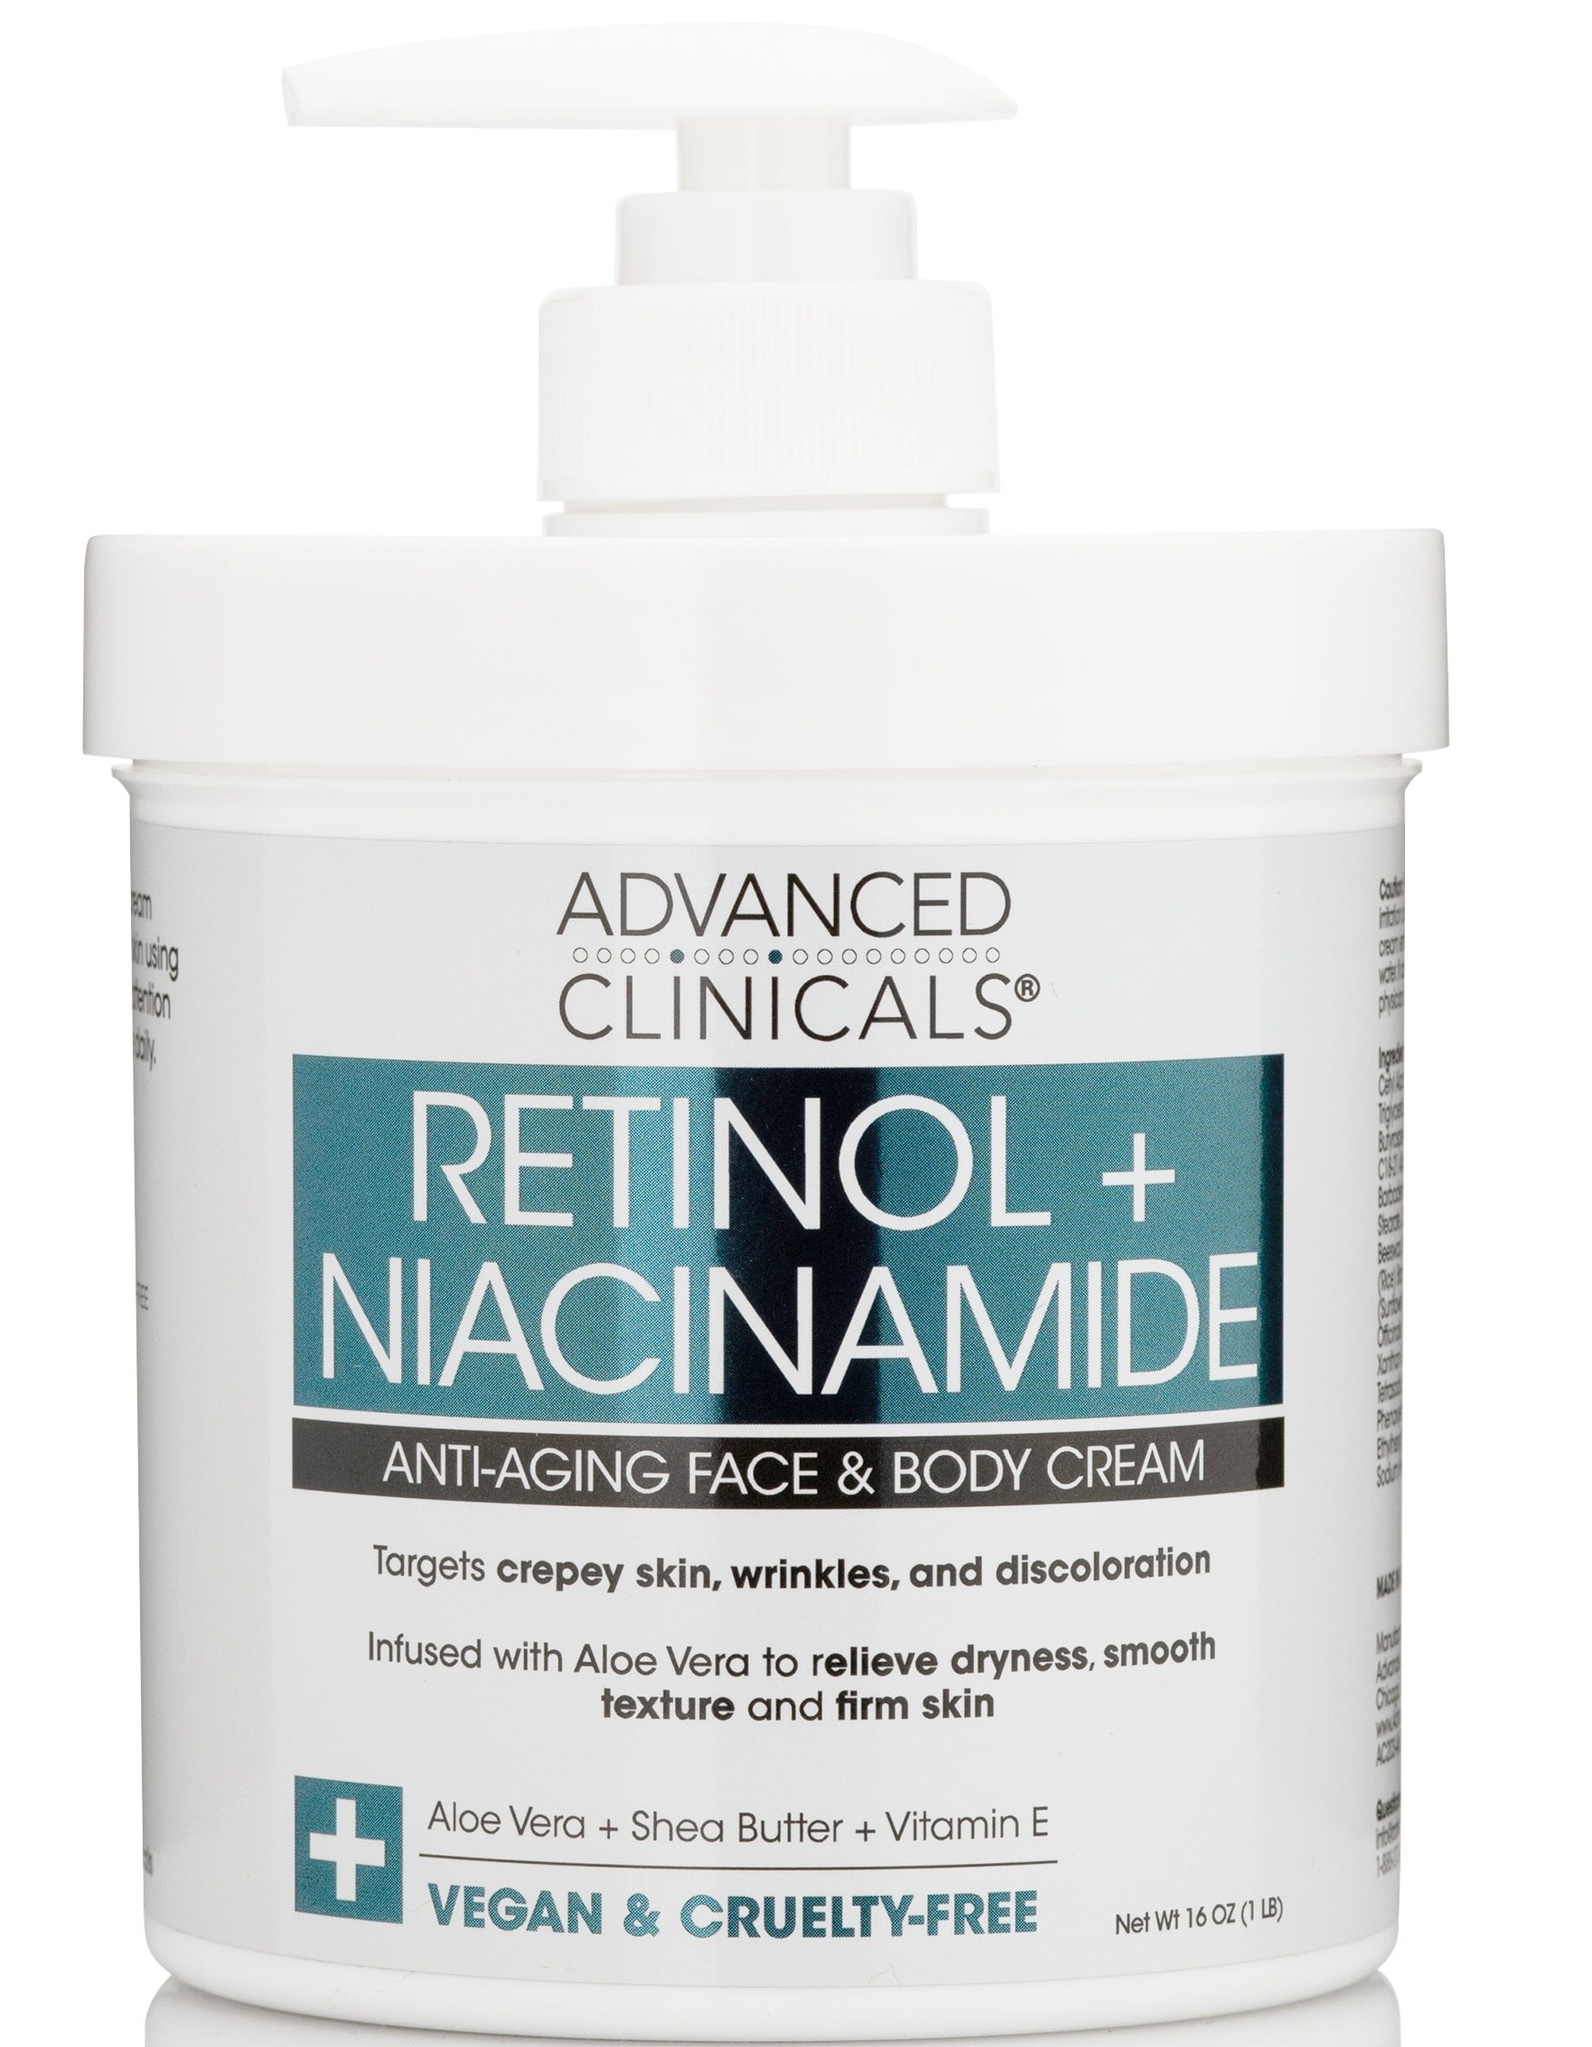 Advanced Clinicals Retinol And Niacinamide Anti-aging Face And Body Cream